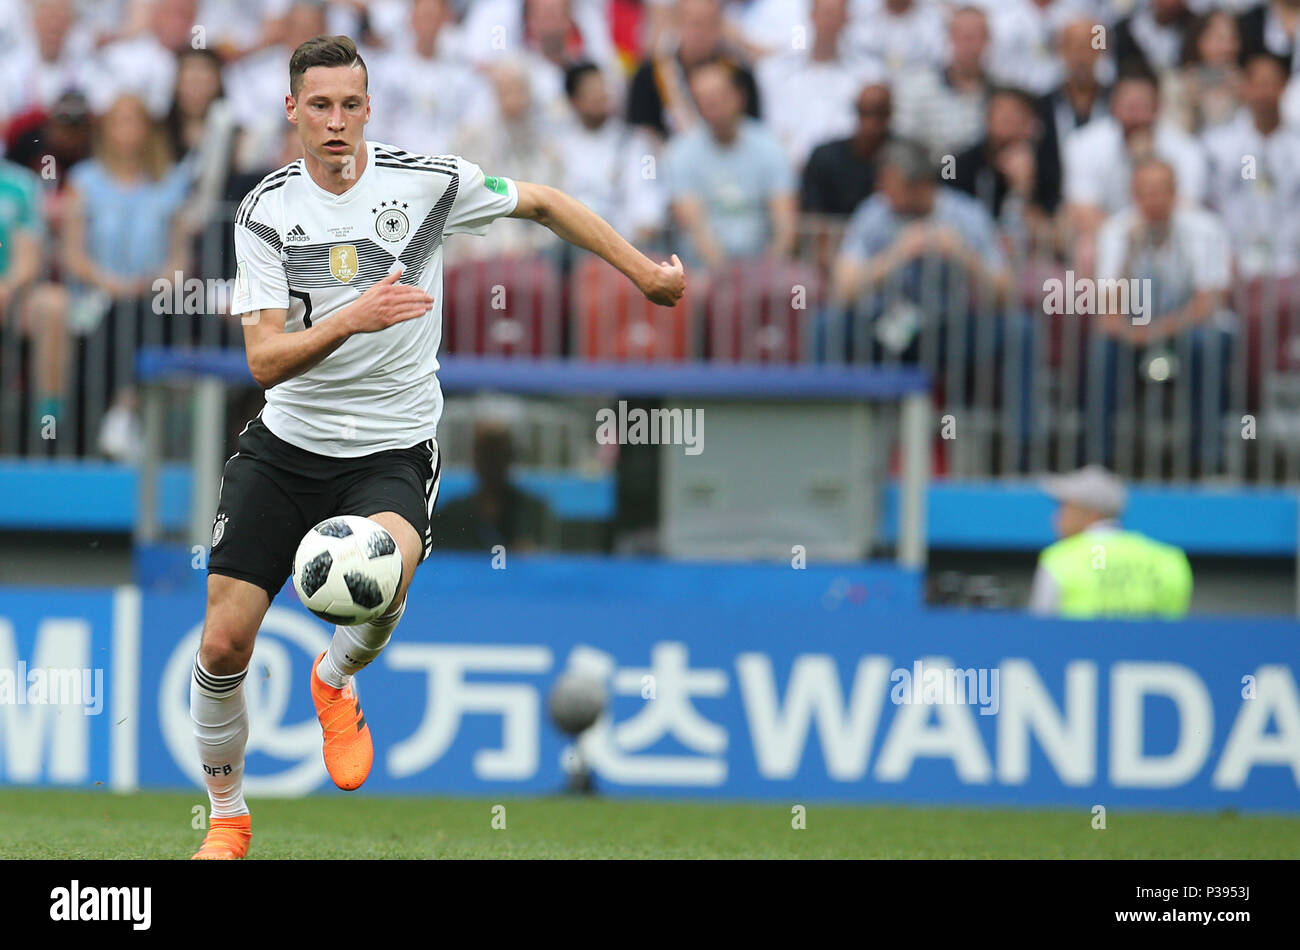 17.06.2018. Moscow, Russian: Draxler in action during the Fifa World Cup Russia 2018, Group F, football match between GERMANY v MEXICO in Luzhniki Stadium  in Moscow. Stock Photo